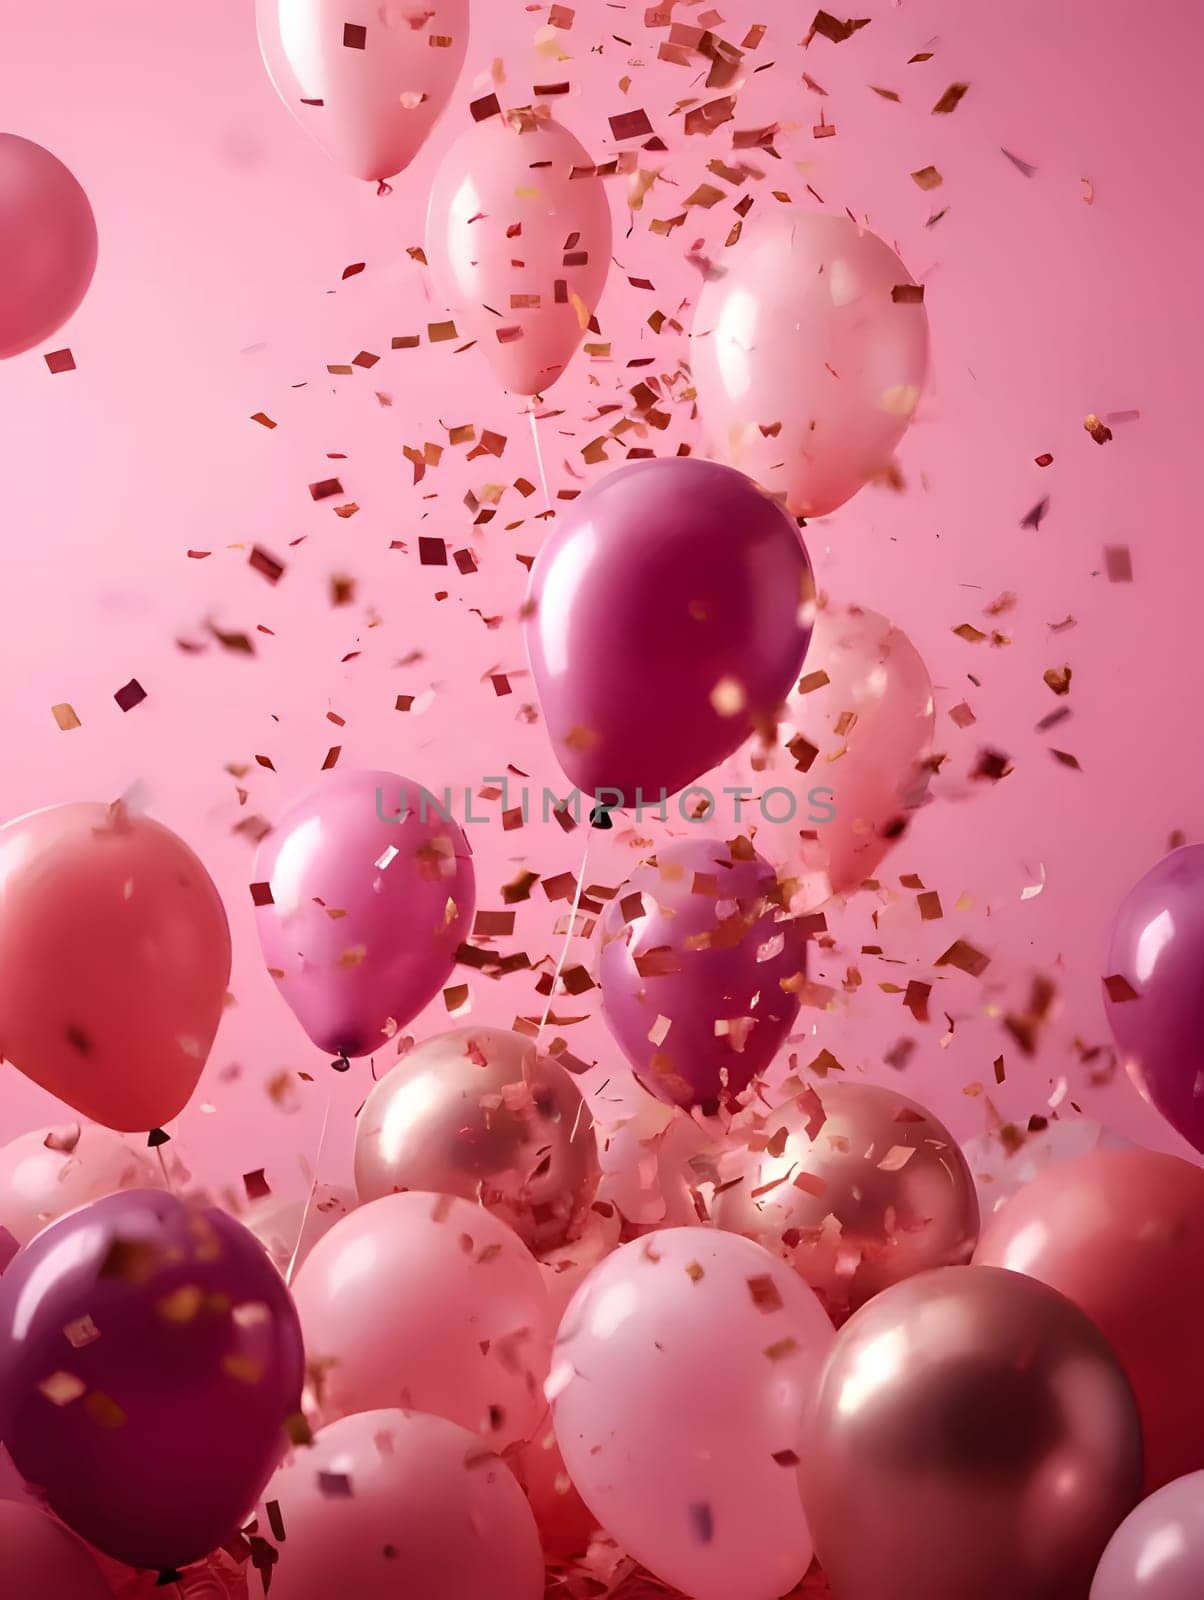 Colorful; pink, red, white balloons and confetti. New Year's party and celebrations. A time of celebration and resolutions.